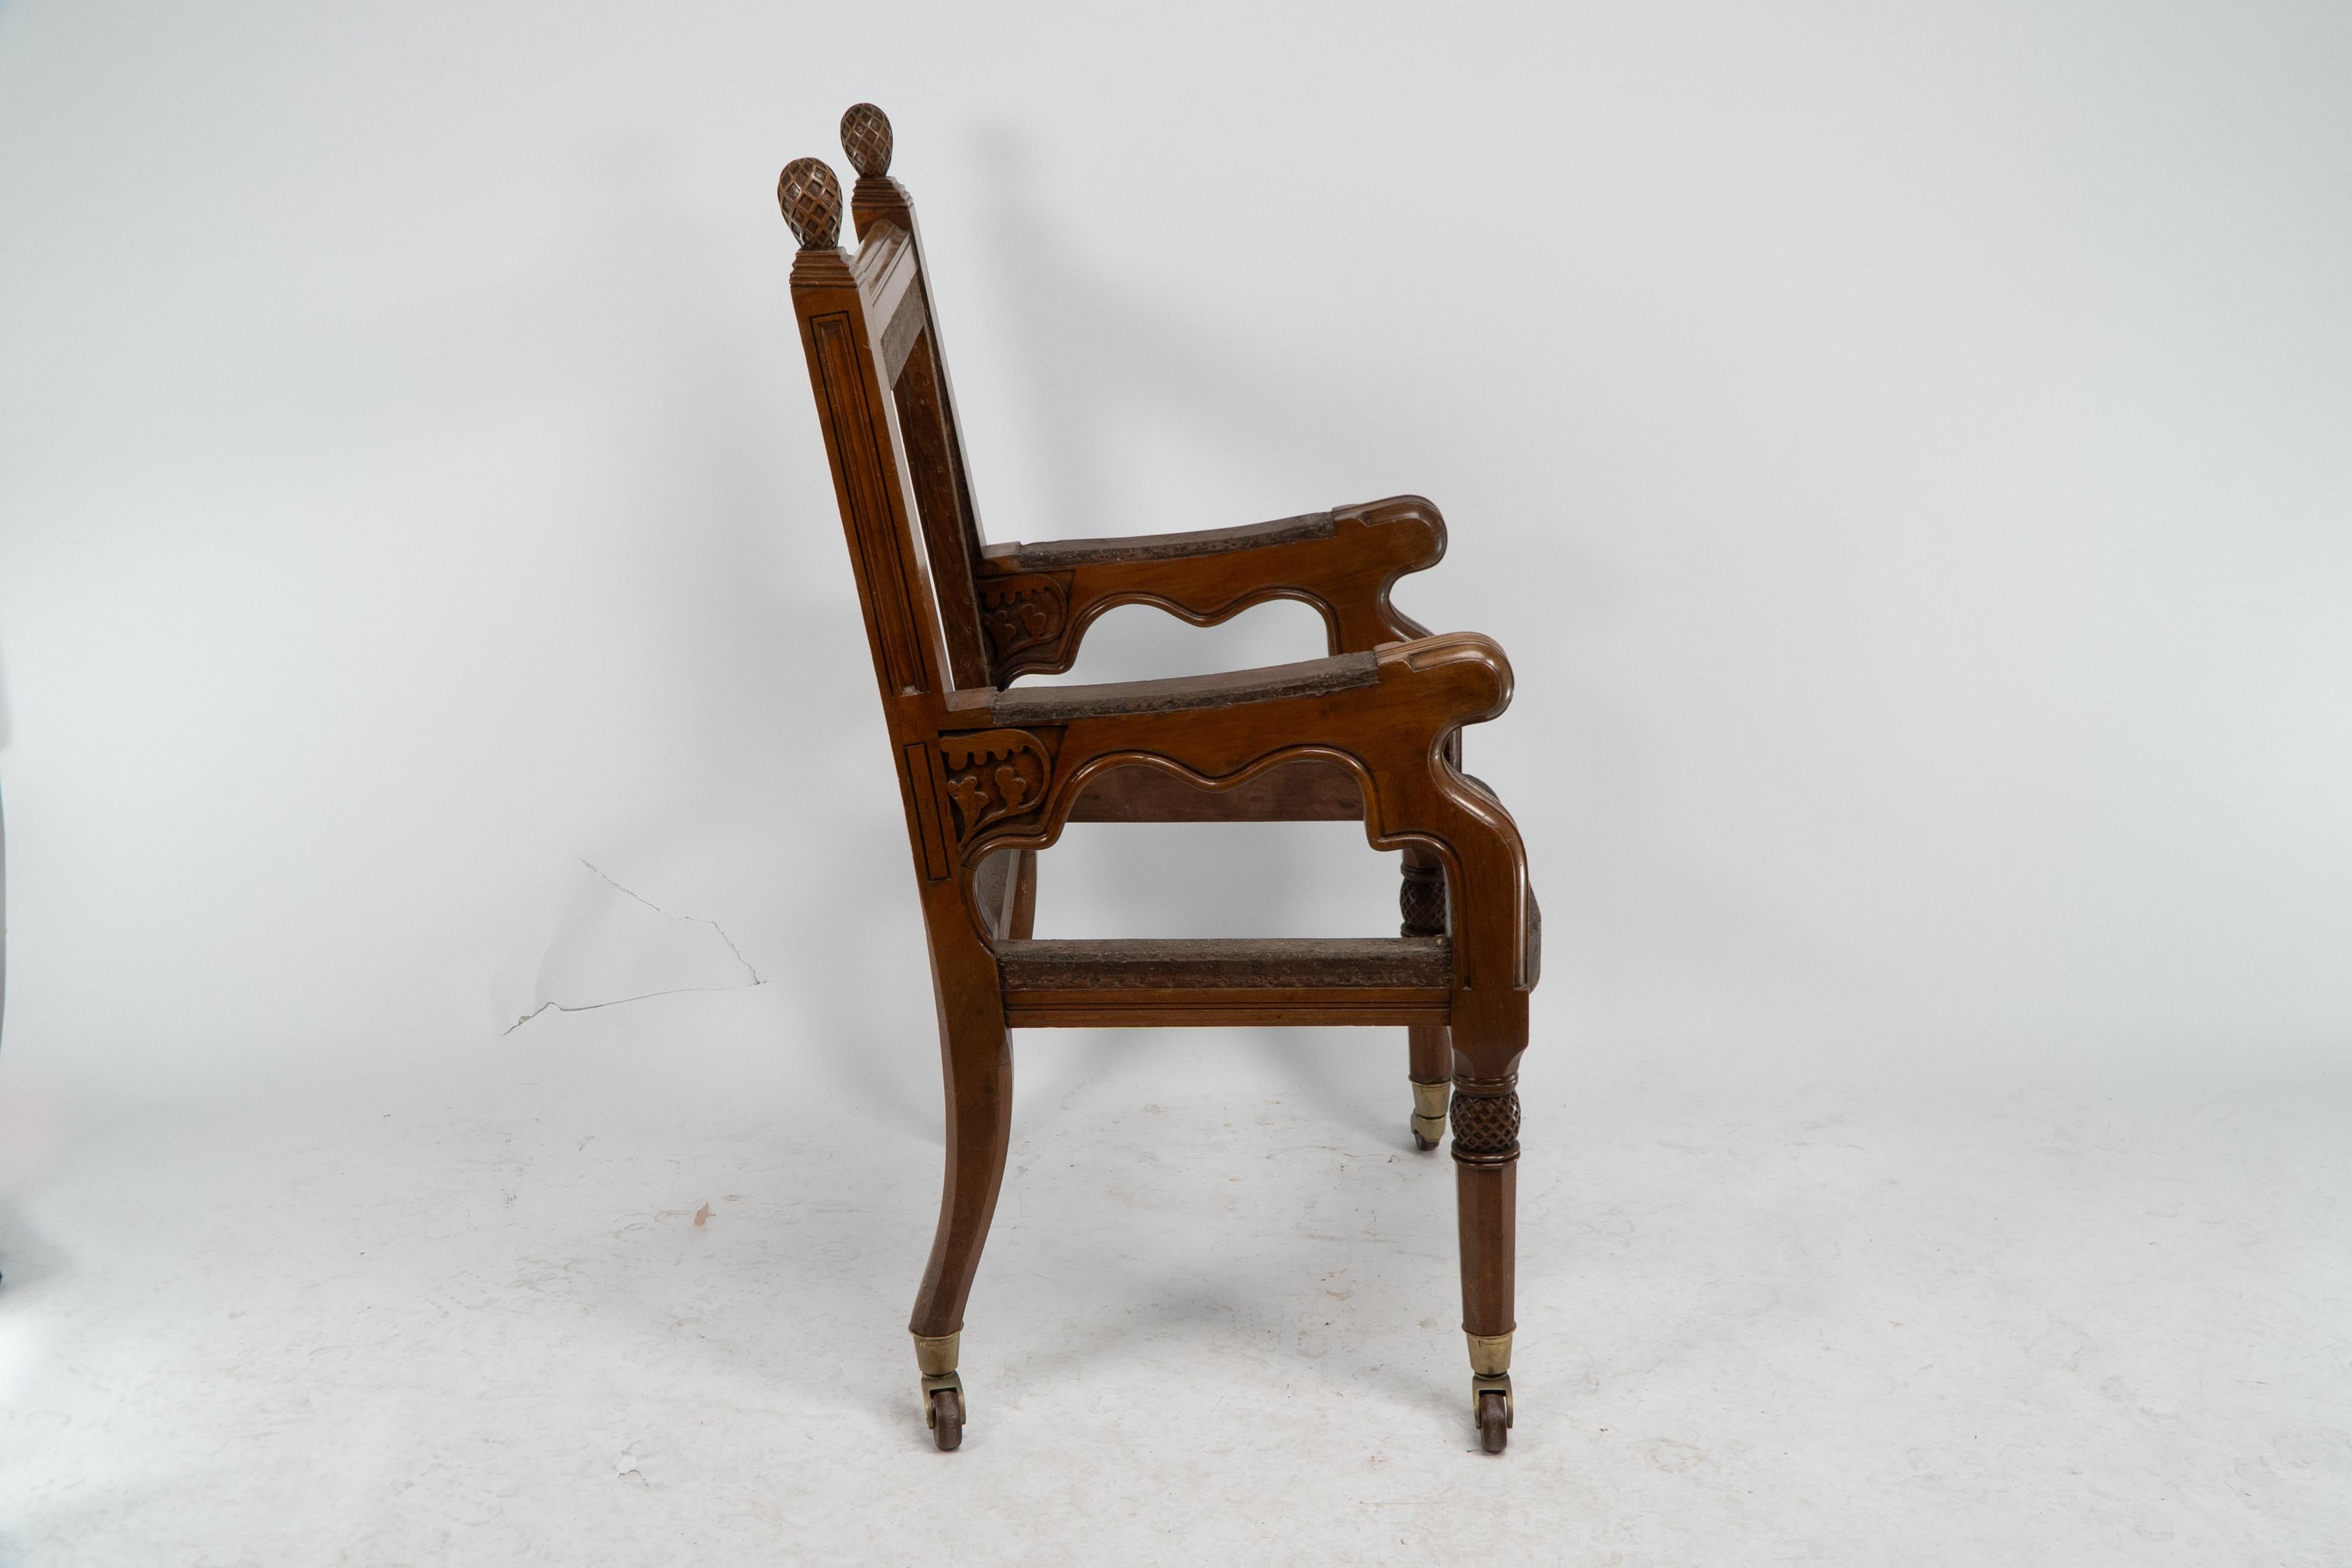 Gothic Revival George Edmund Street. Judges armchair designed for The Royal Courts of Justice. For Sale